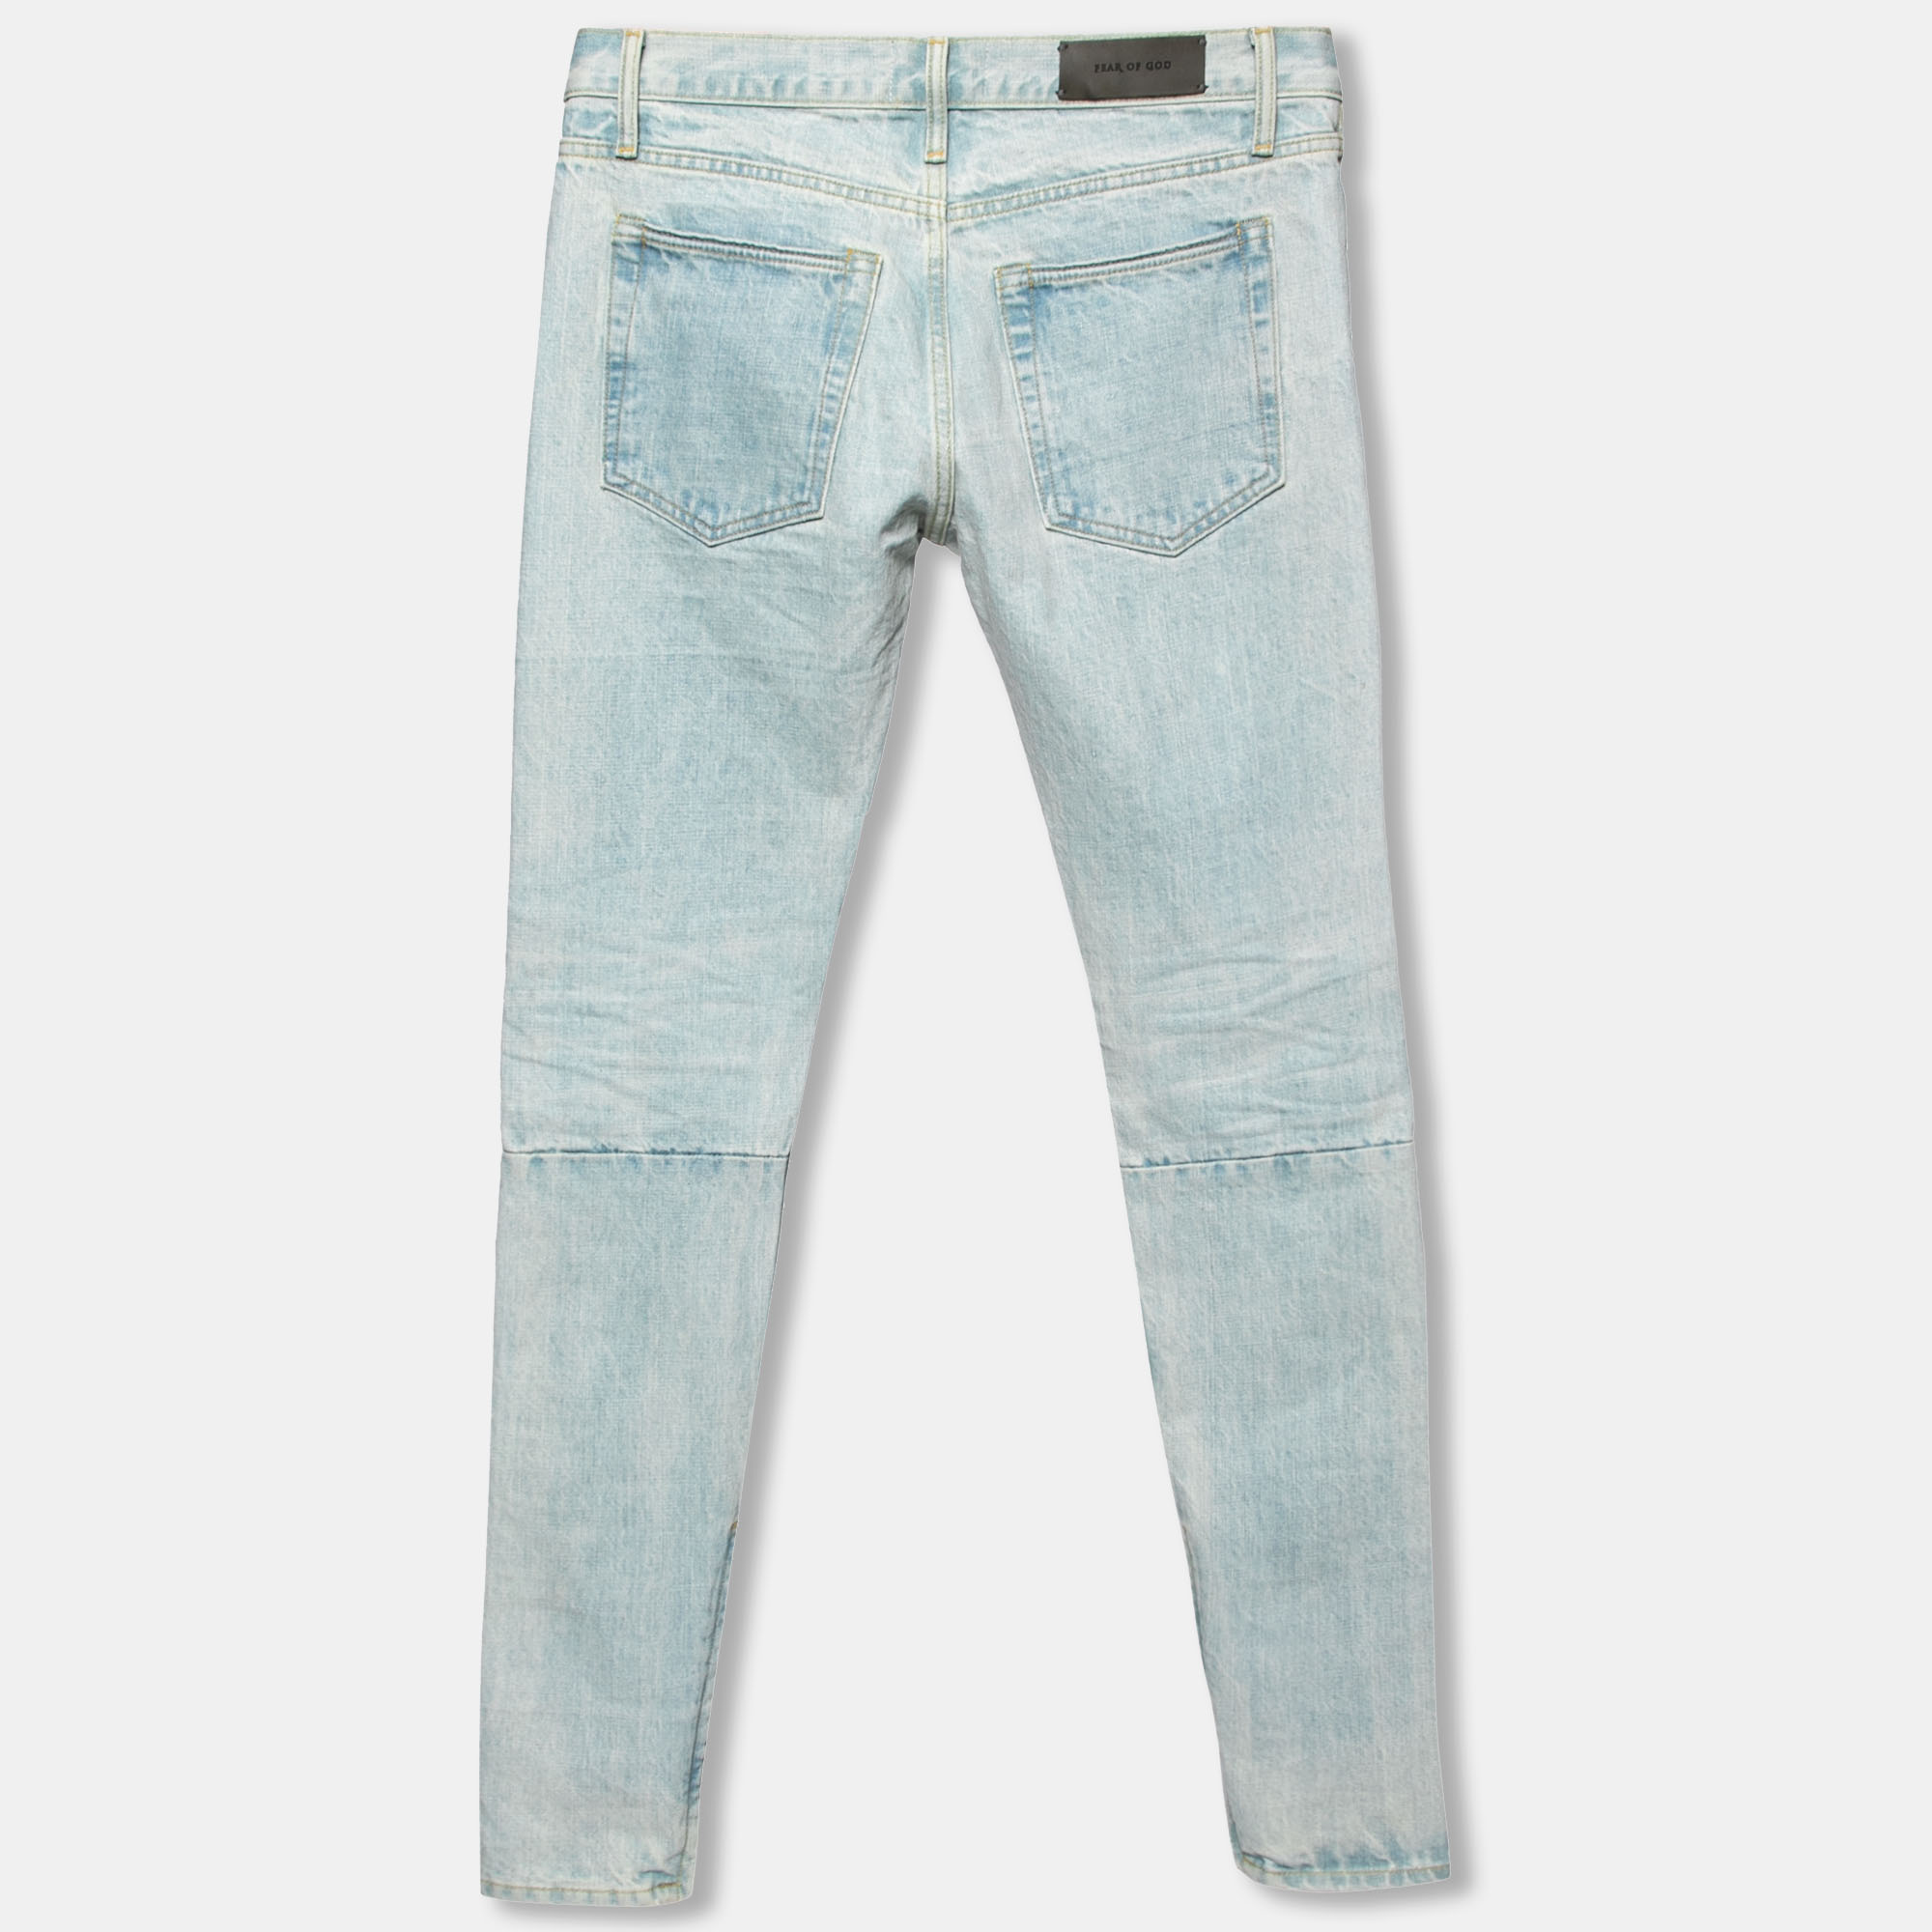 Fear of God Blue Distressed Denim Zipped Hem Slim Fit Jeans M  - buy with discount